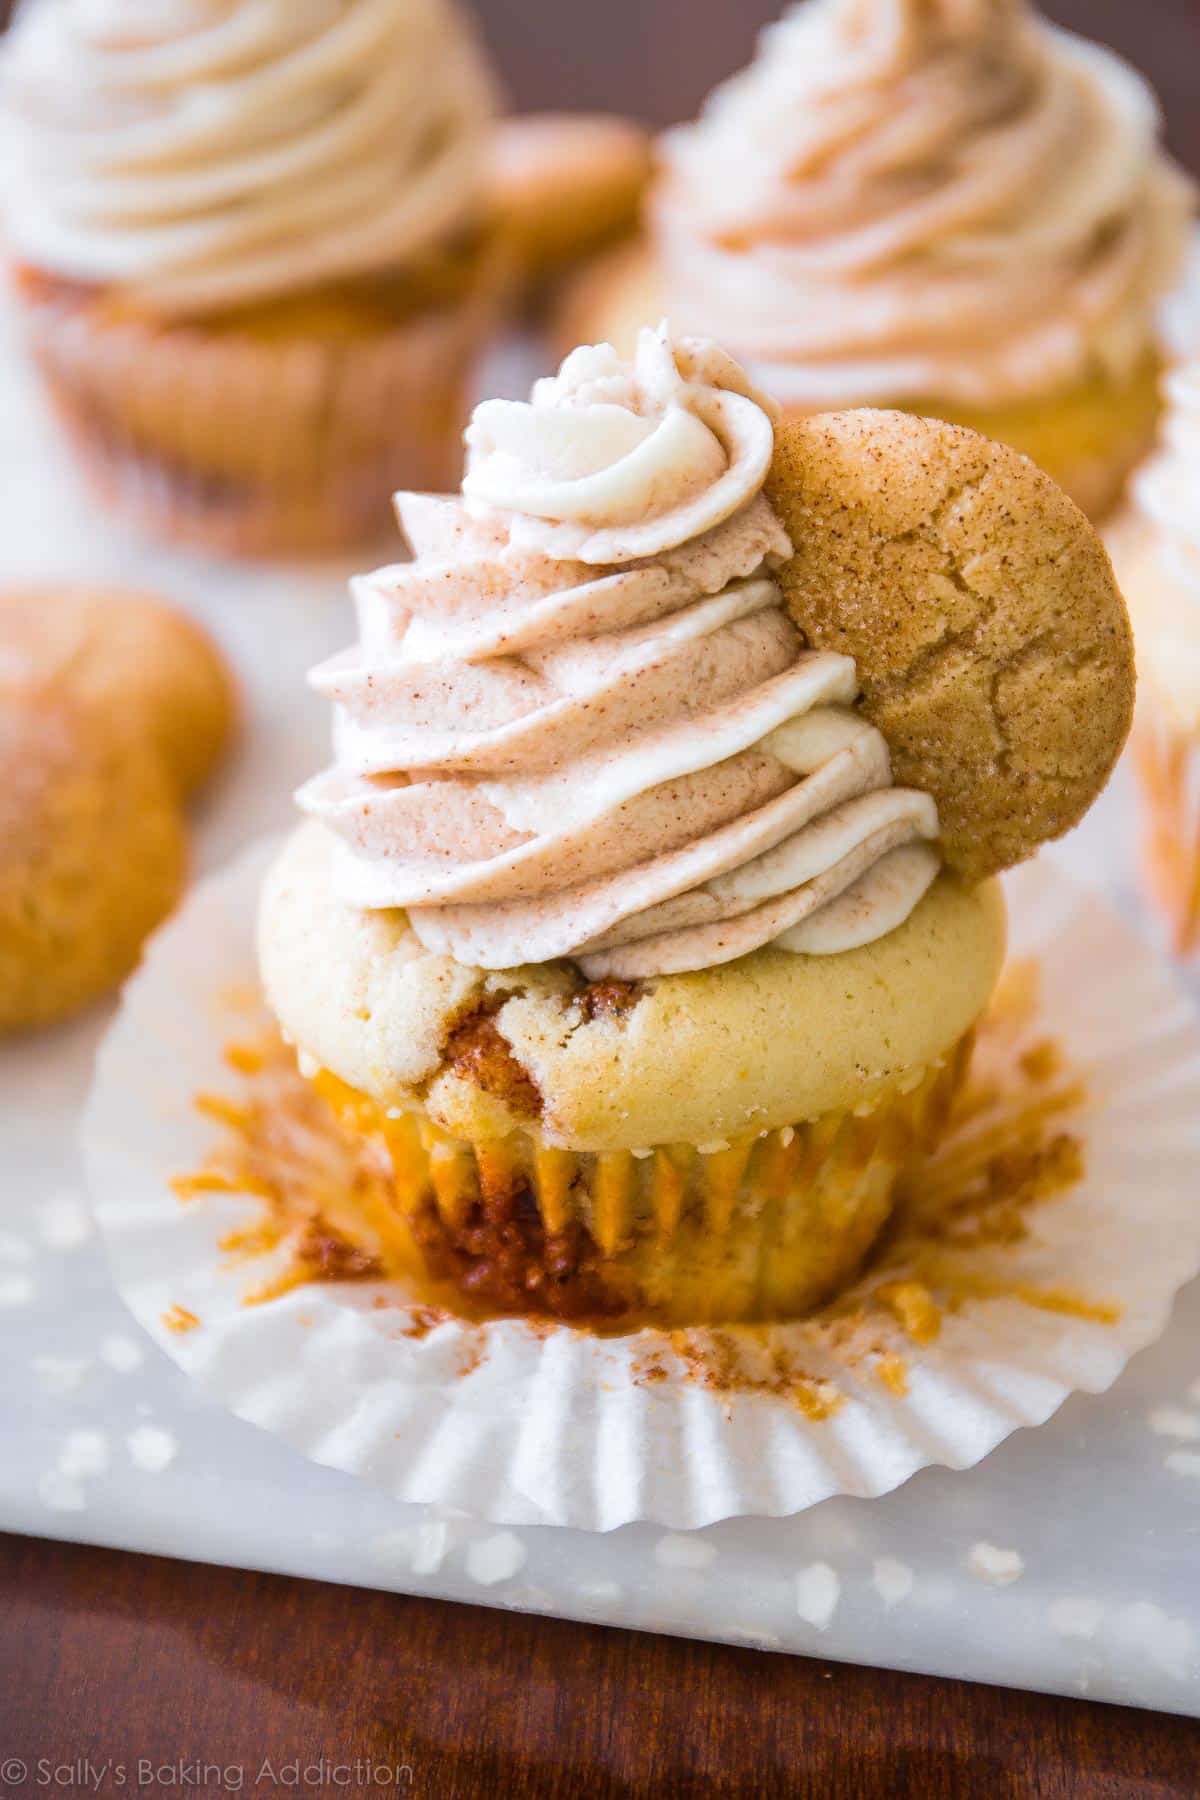 snickerdoodle cupcake topped with cinnamon and vanilla swirl frosting and a snickerdoodle cookie